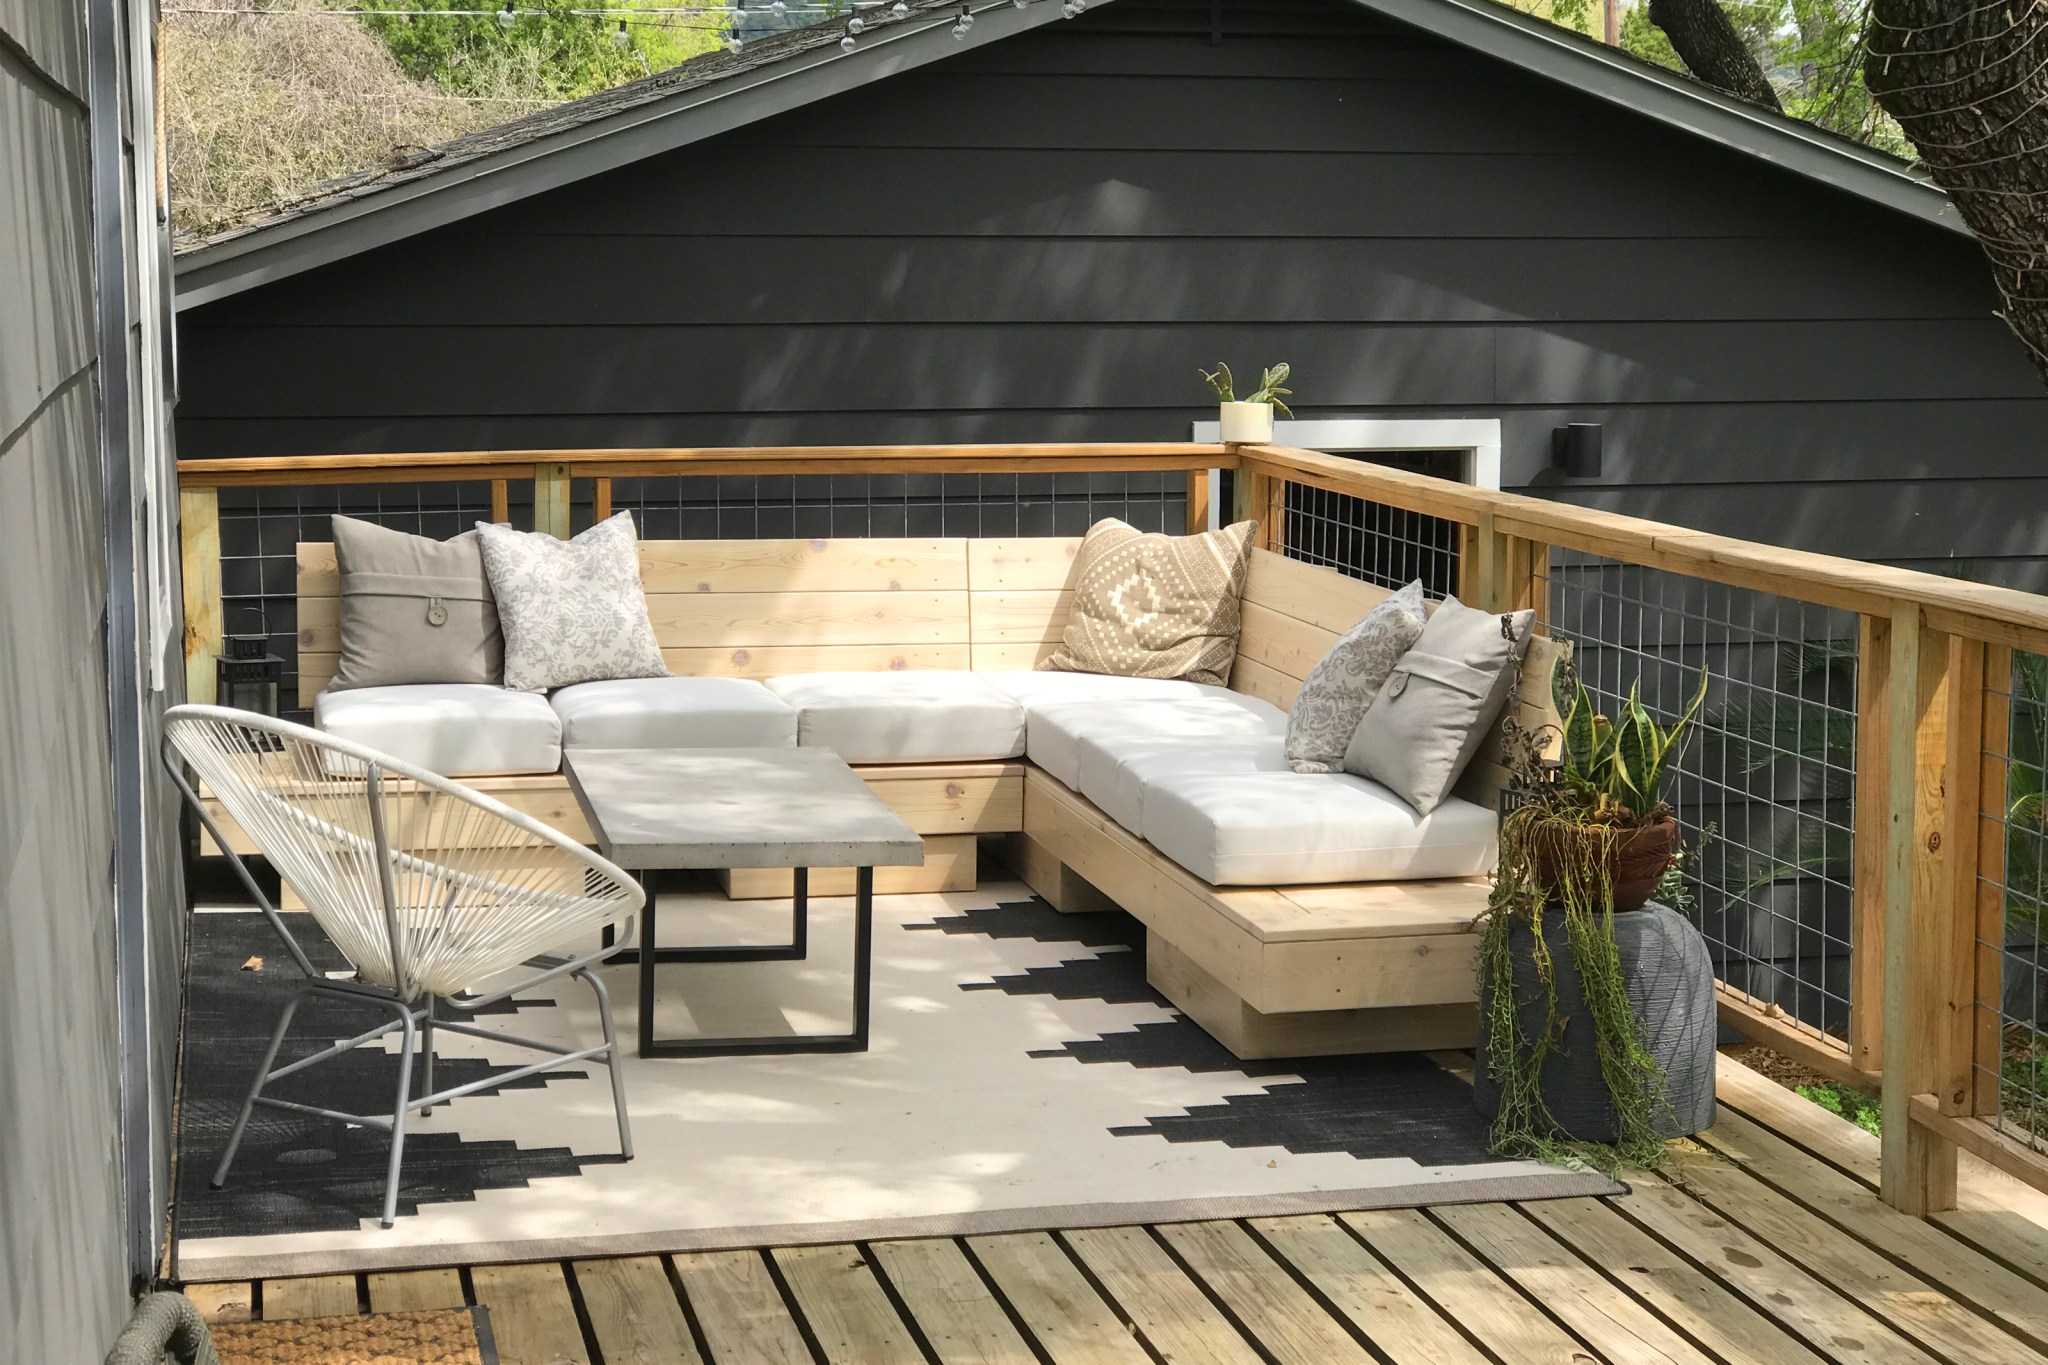 New deck maintenance with new sectional and cable rails